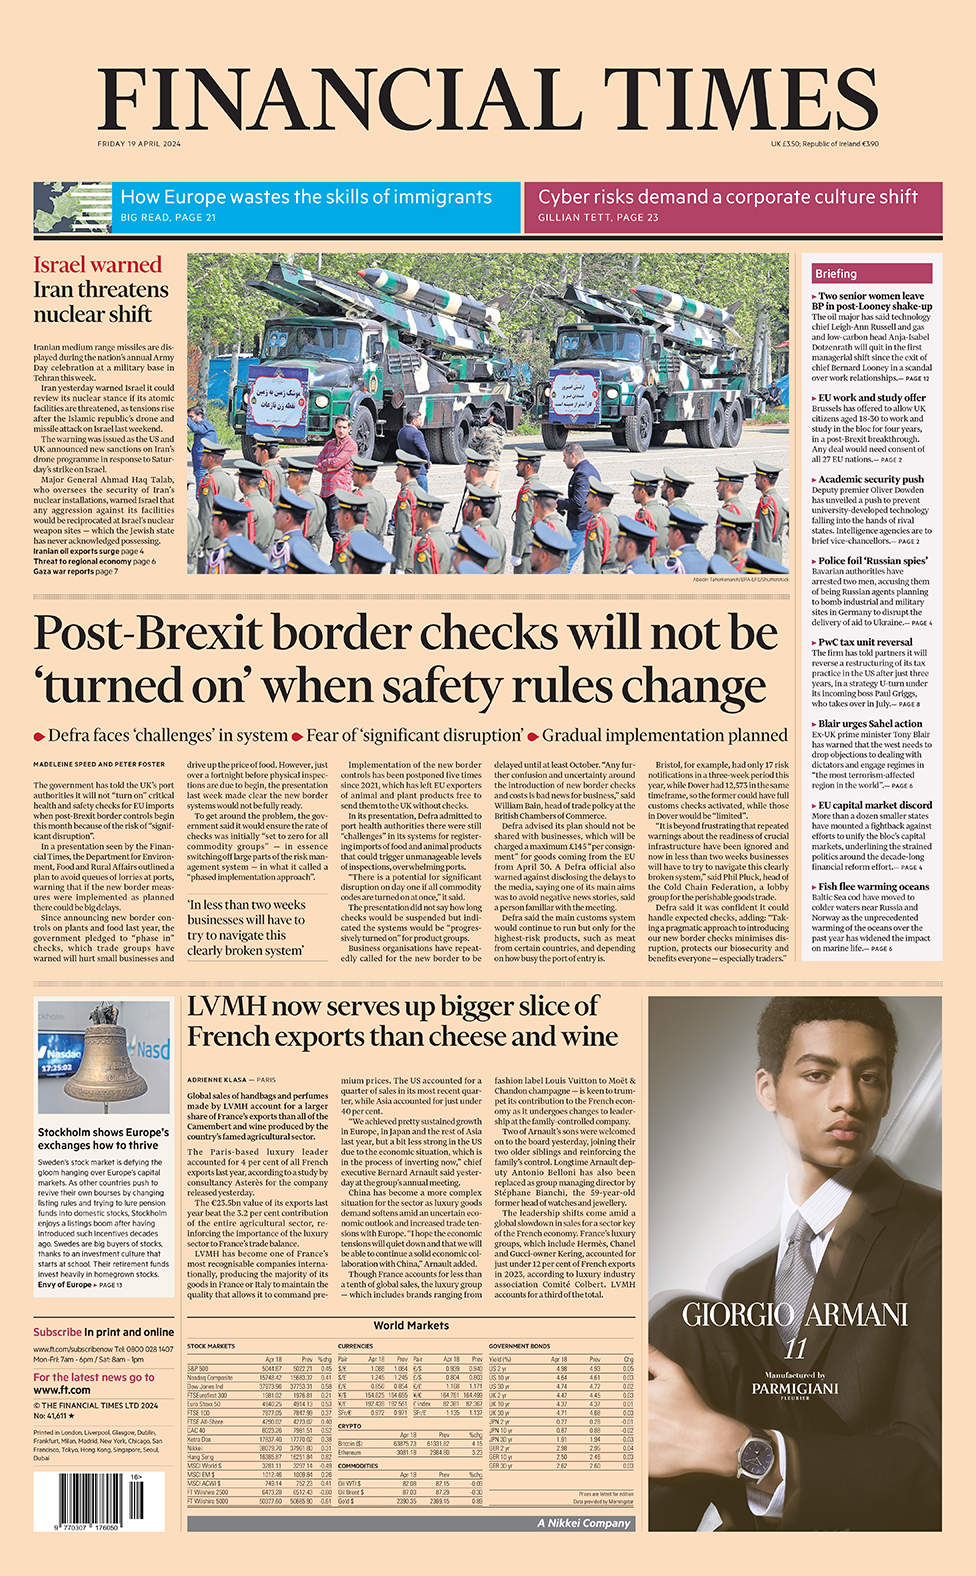 The headline in the Financial Times reads: "Post-Brexit border checks will not be 'turned on' when safety rules change".